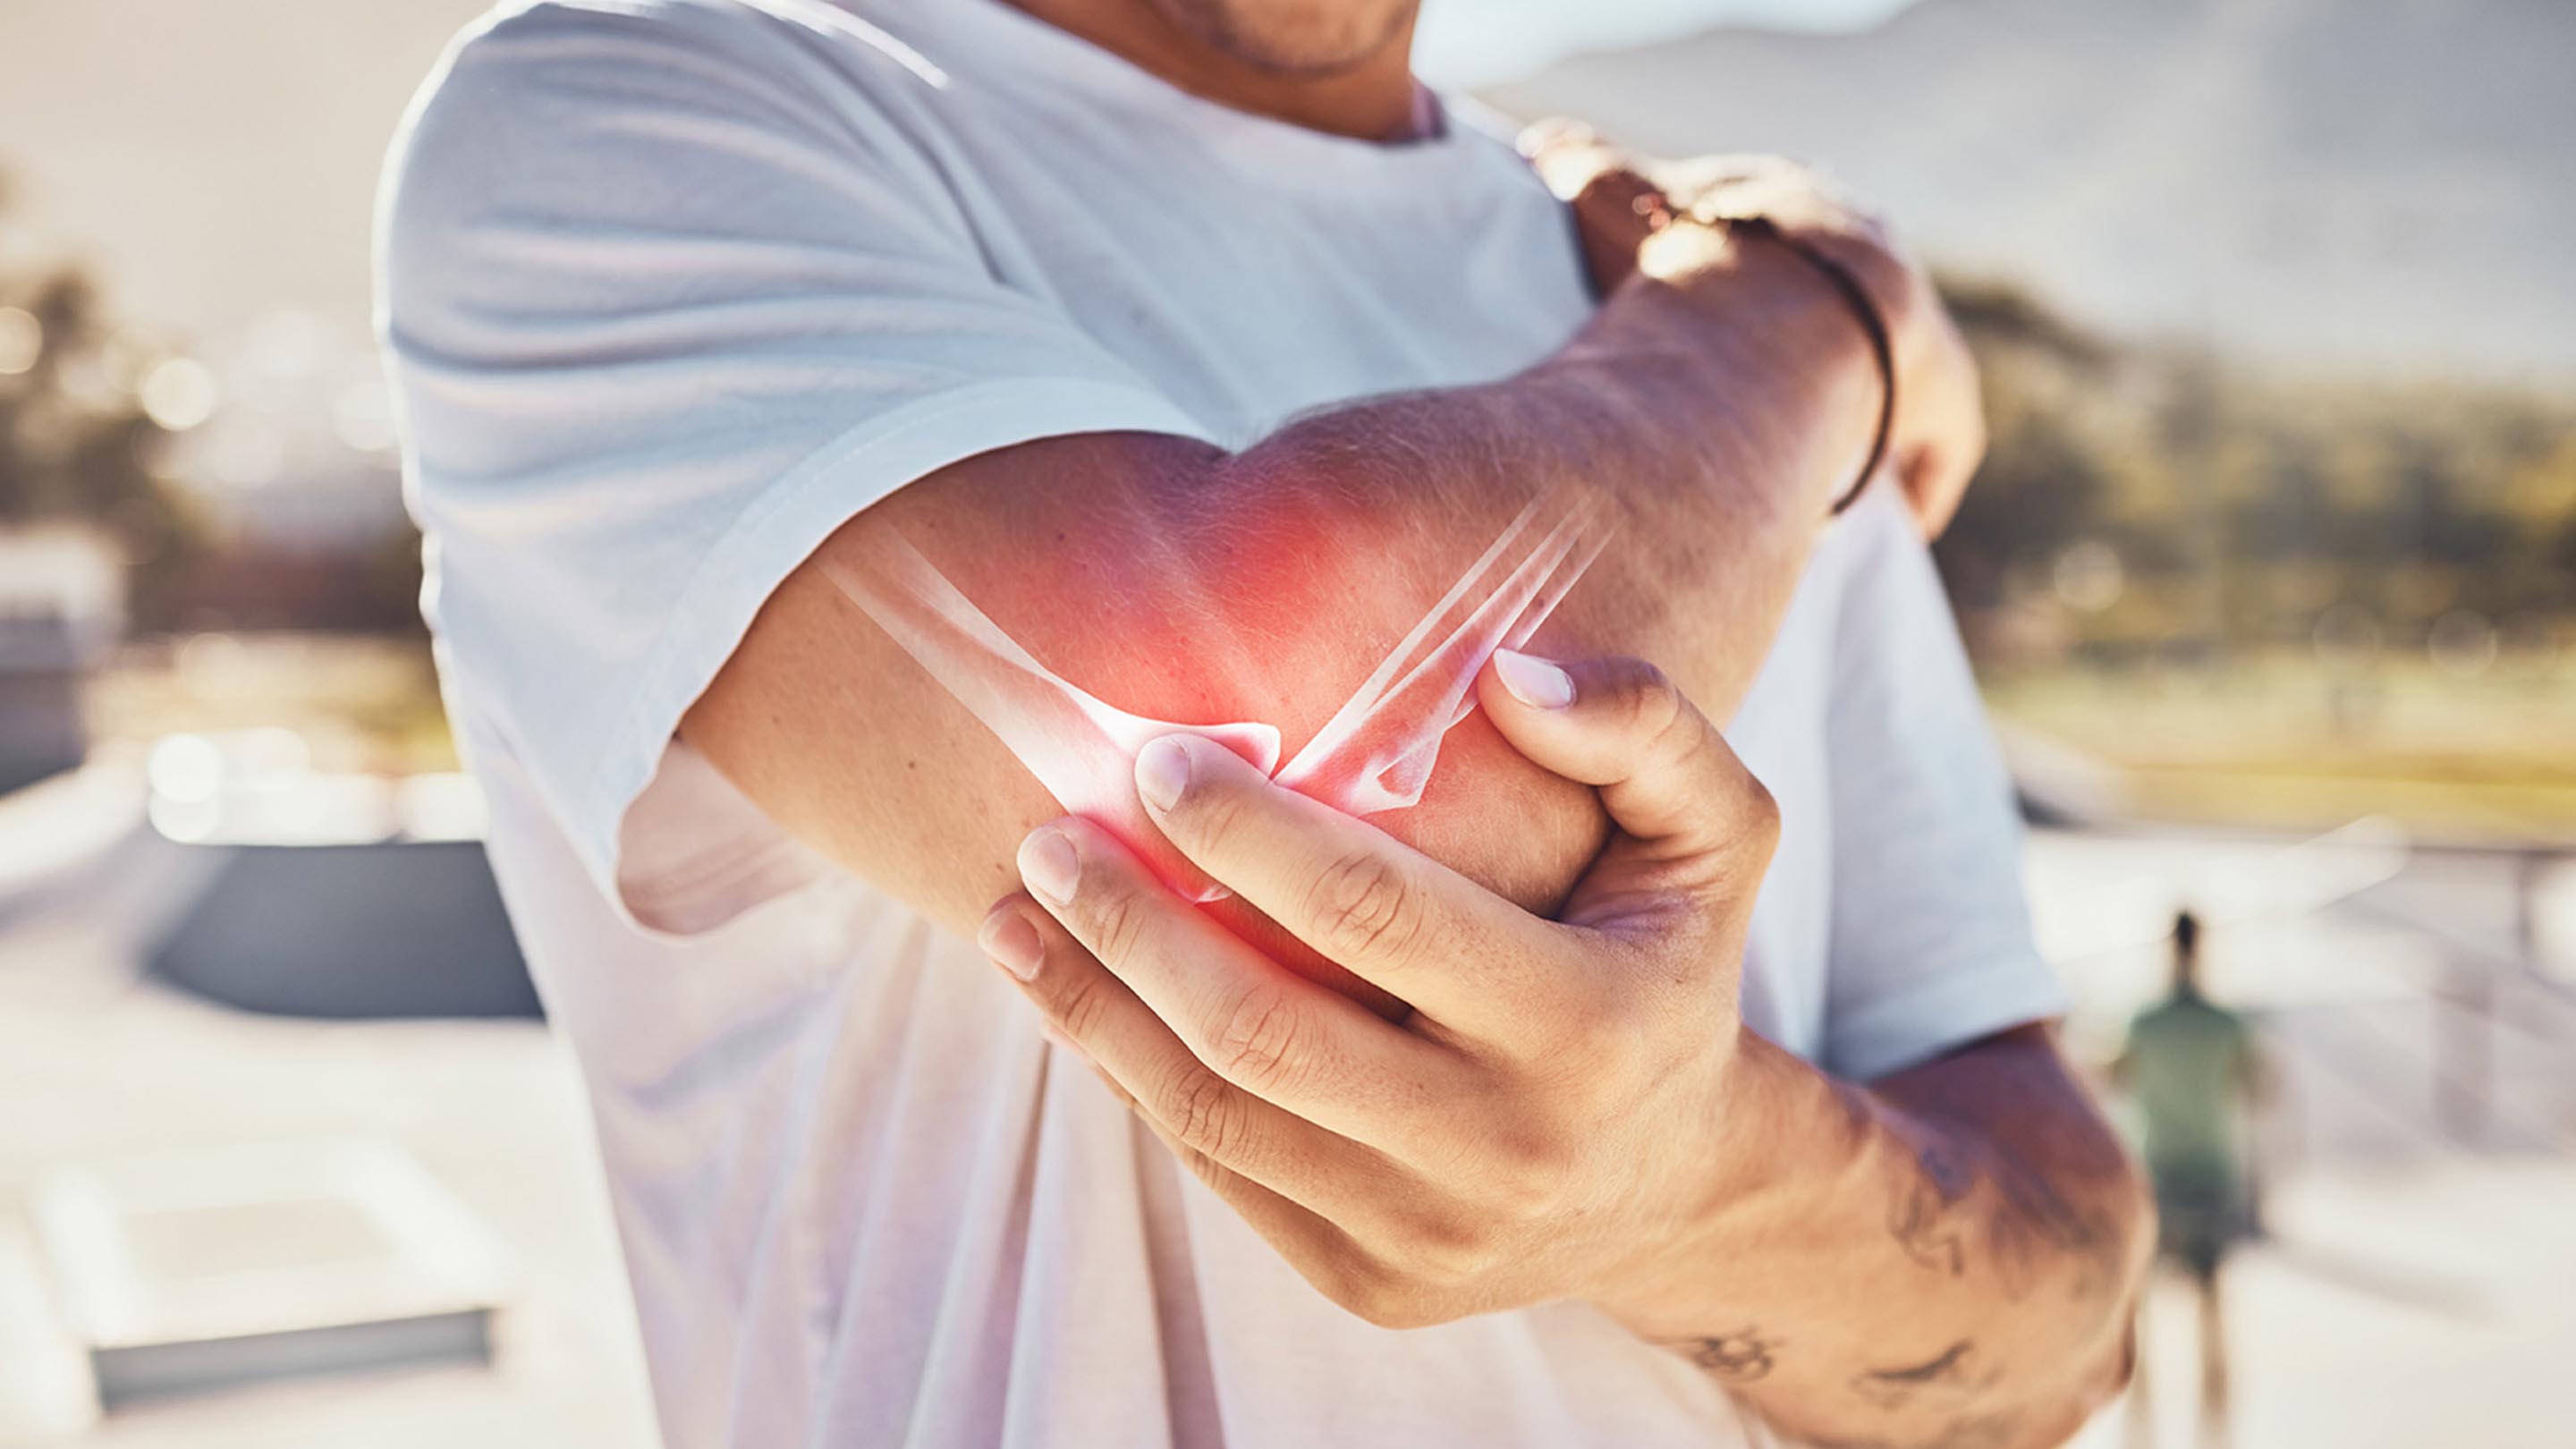 Elbow pain | Causes and treatments - Aviva